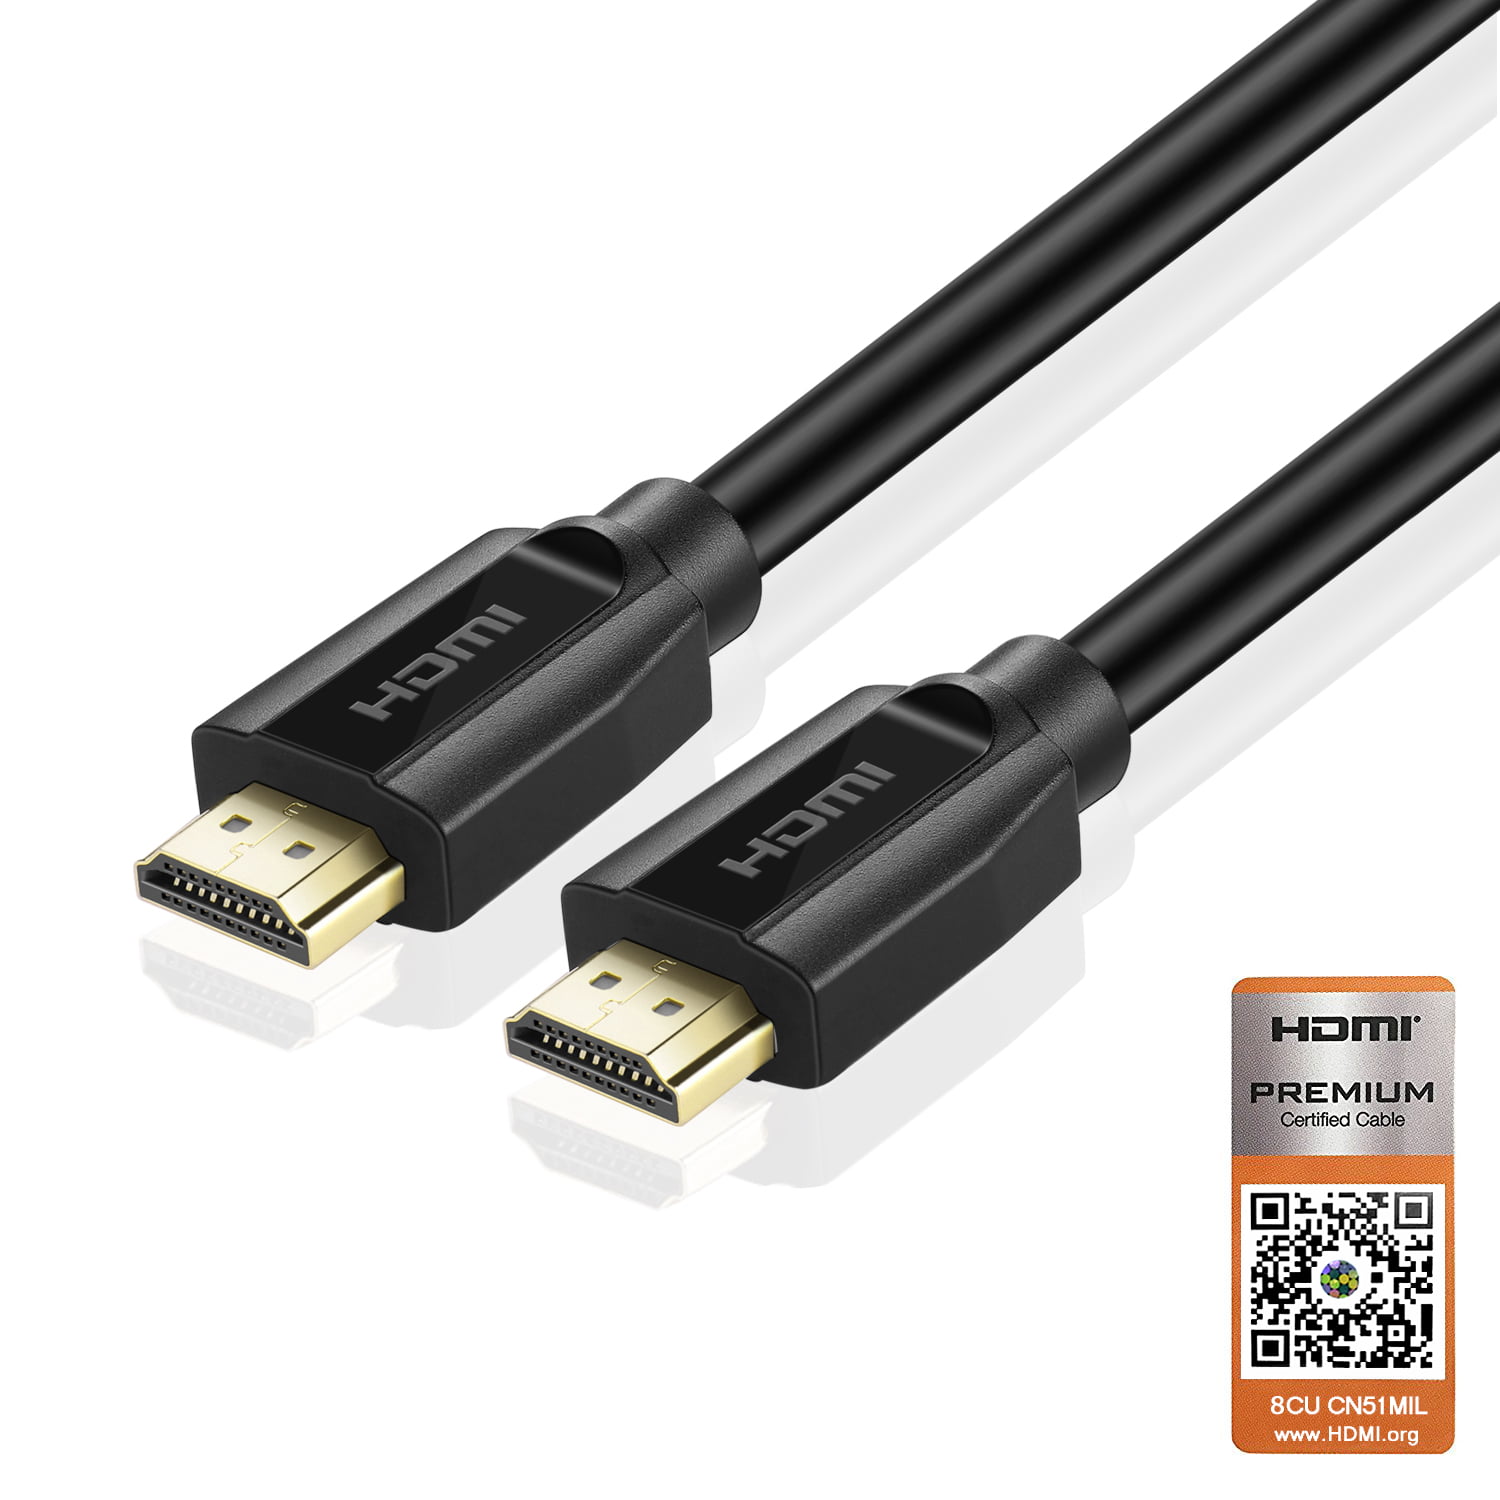 Premium HDMI Cable (10FT) Certified 4K UHD HDMI 2.0 18GBPs High Speed Ultra HD 60Hz HDR Nylon